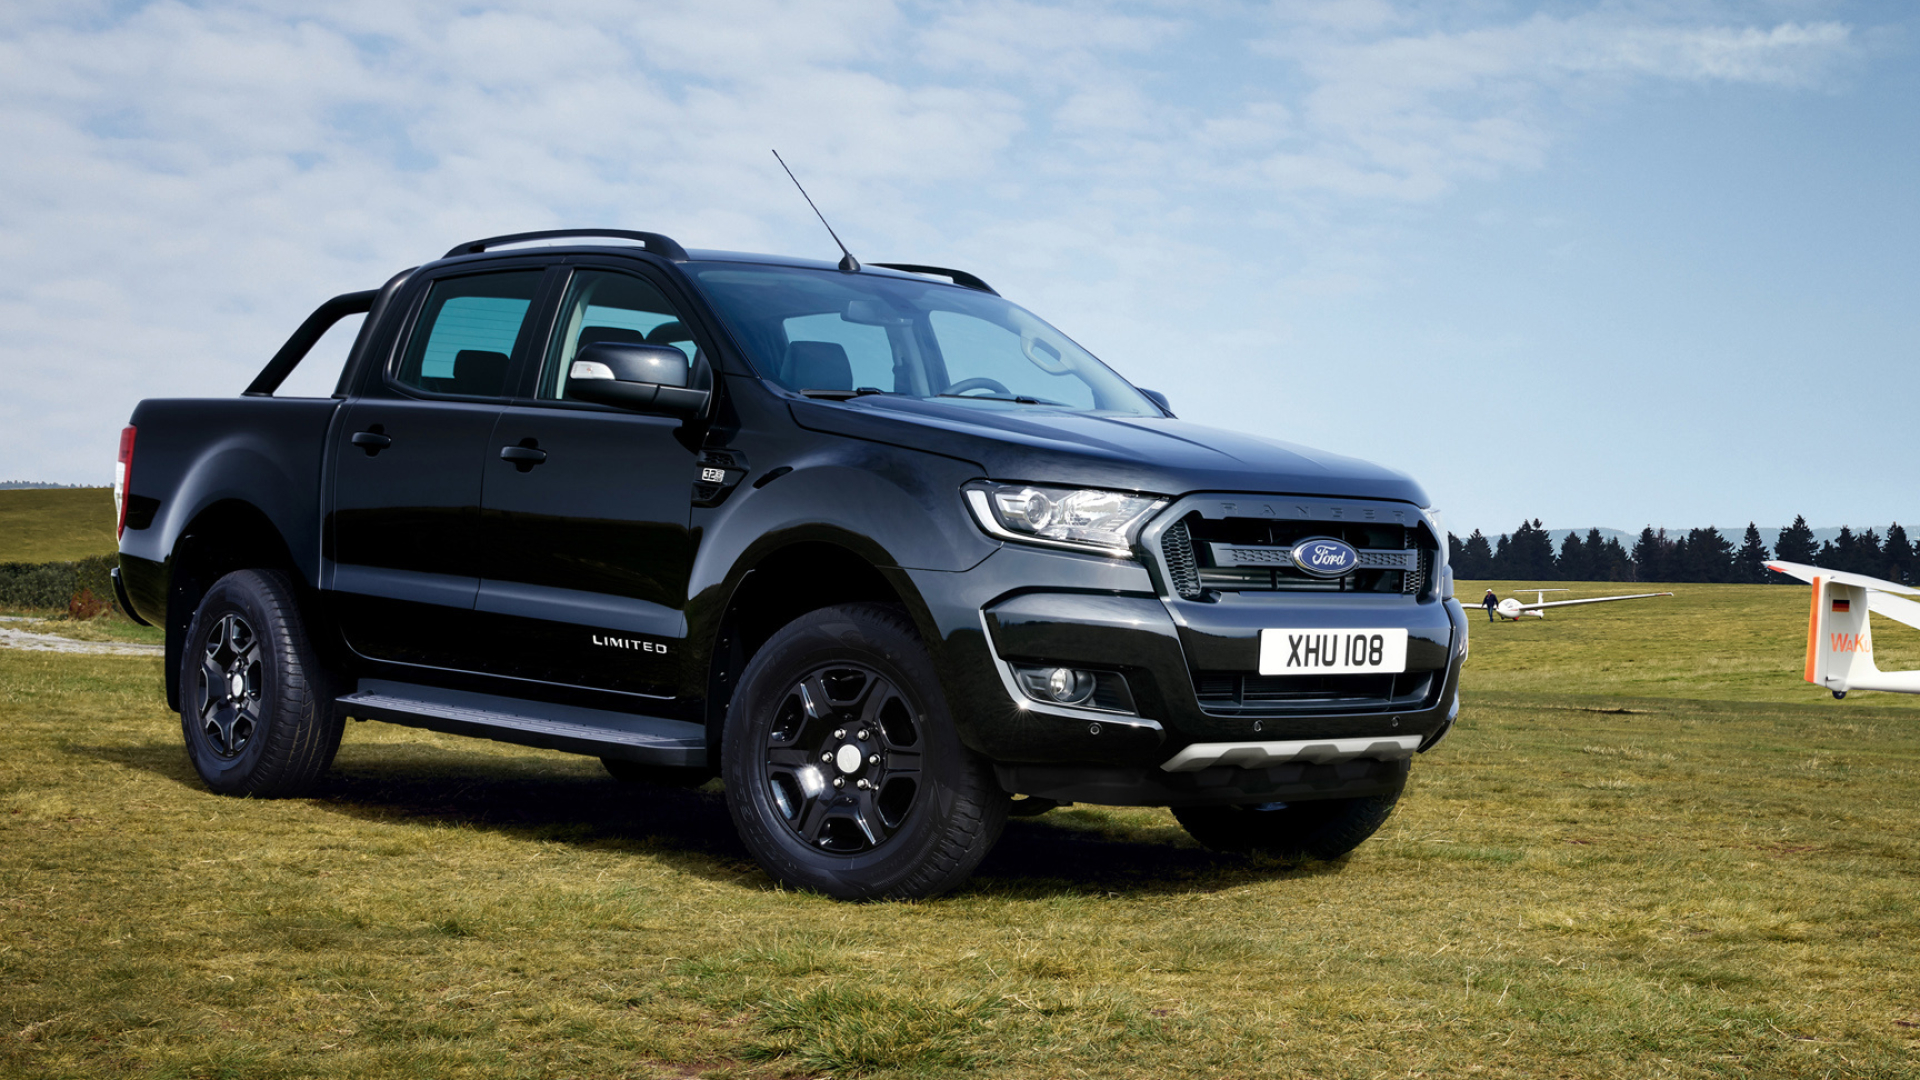 Ford Ranger: The first-generation had five trim levels: S, Ranger, XL, XLS, and XLT. 1920x1080 Full HD Background.